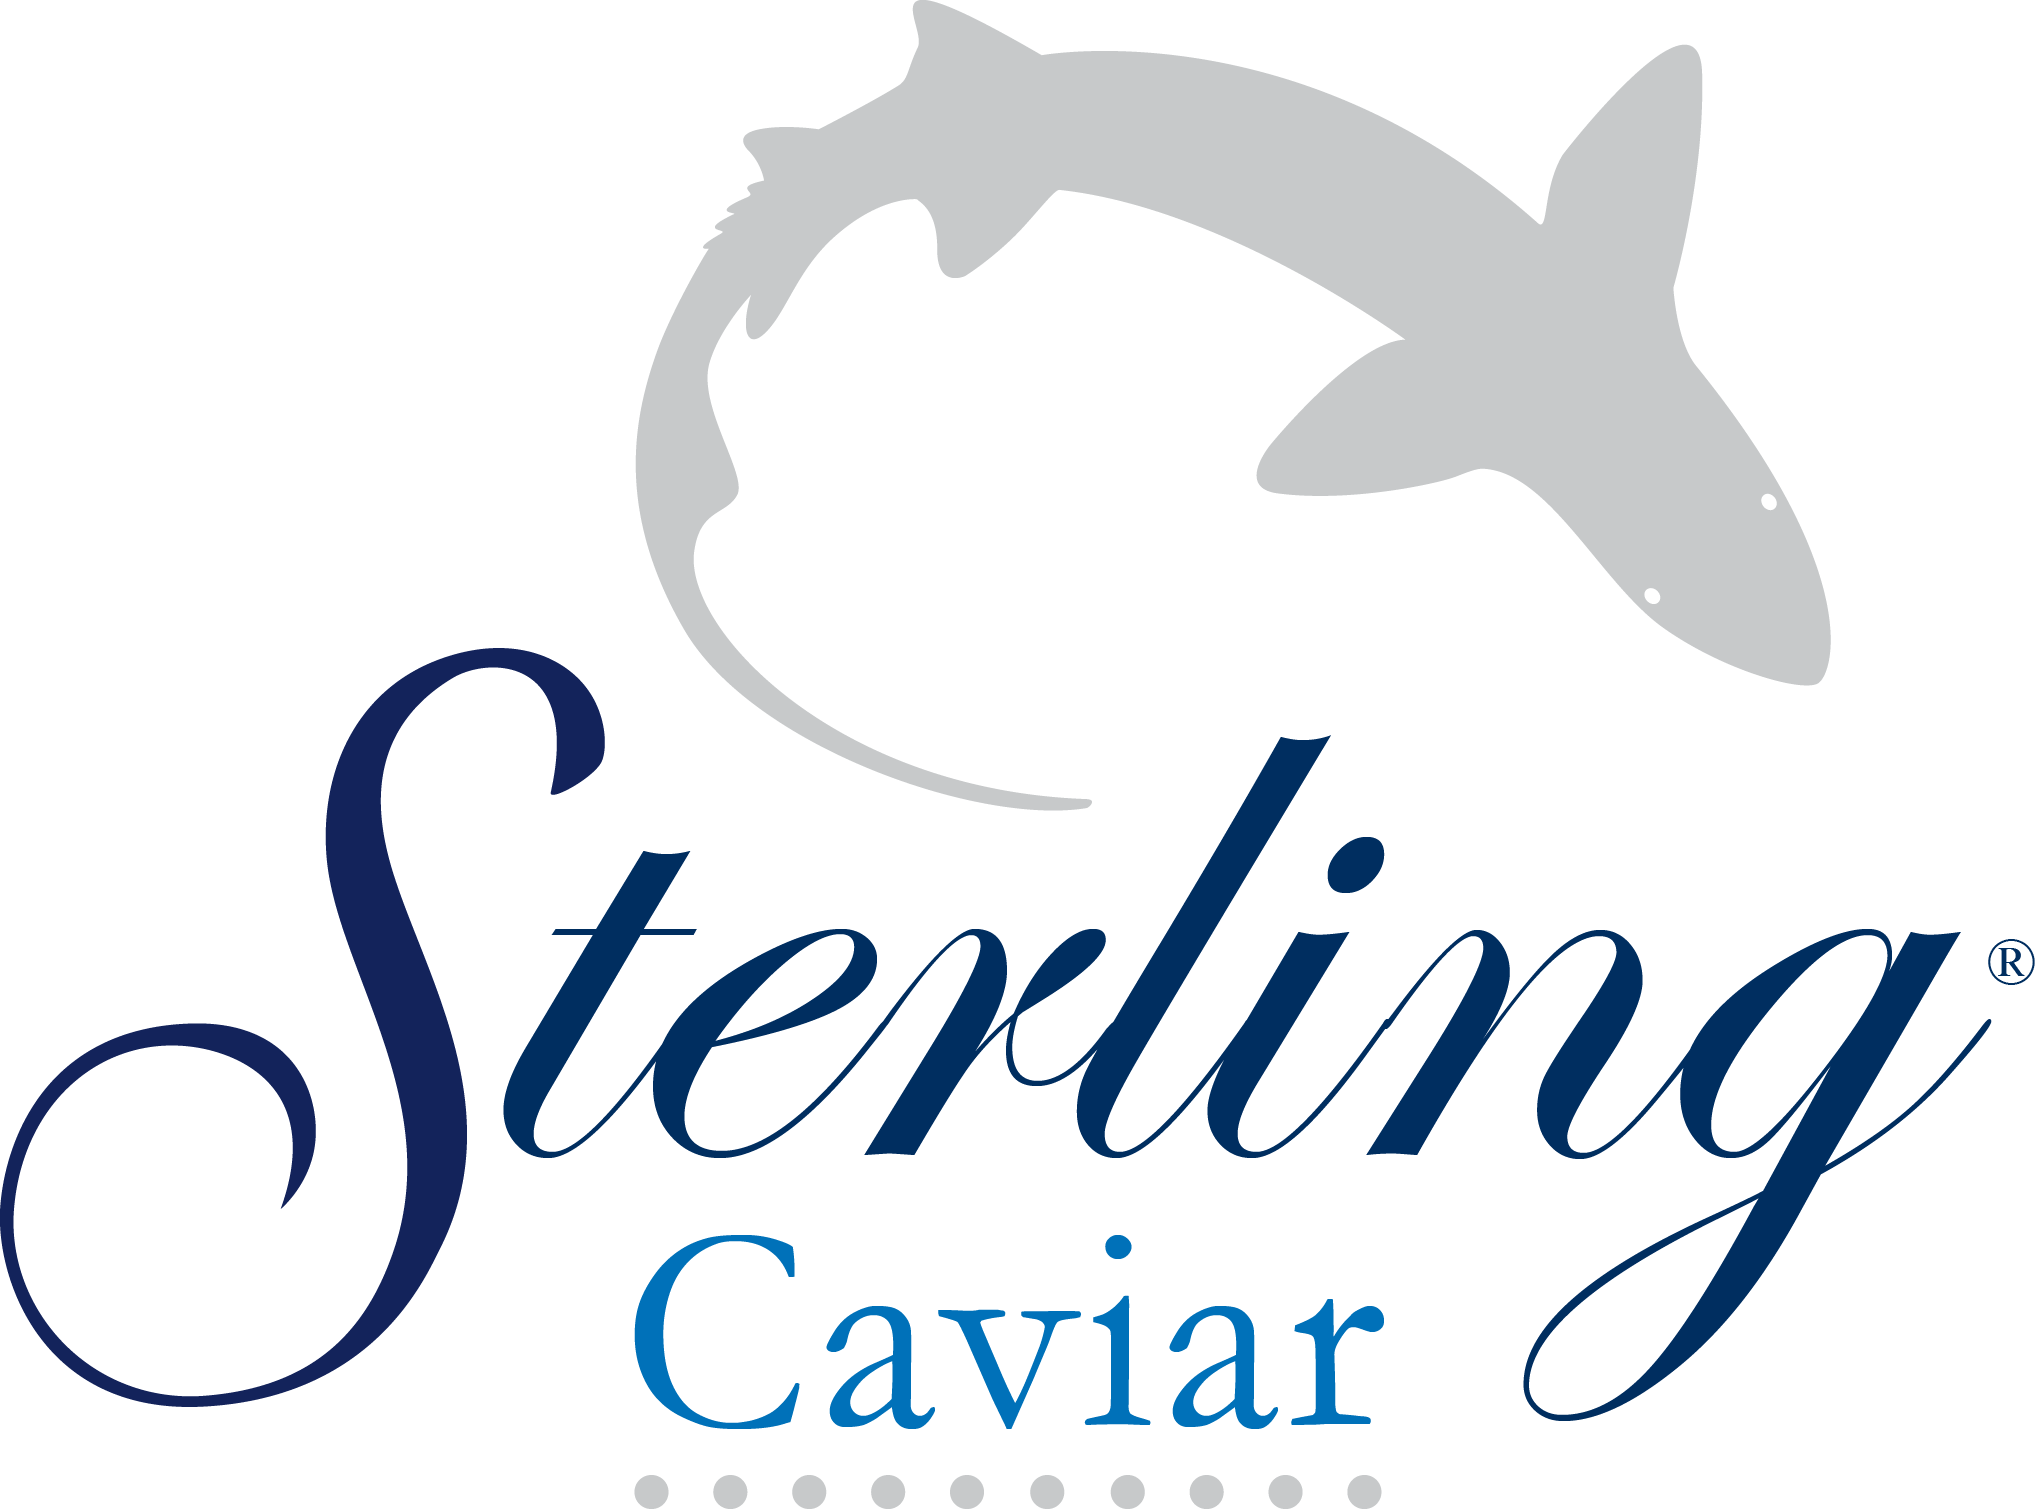 Located in California’s farm-to-fork capital of Sacramento, Sterling Caviar is America’s pioneer of sustainable sturgeon farming and sturgeon caviar production, and is the nation’s leading producer.